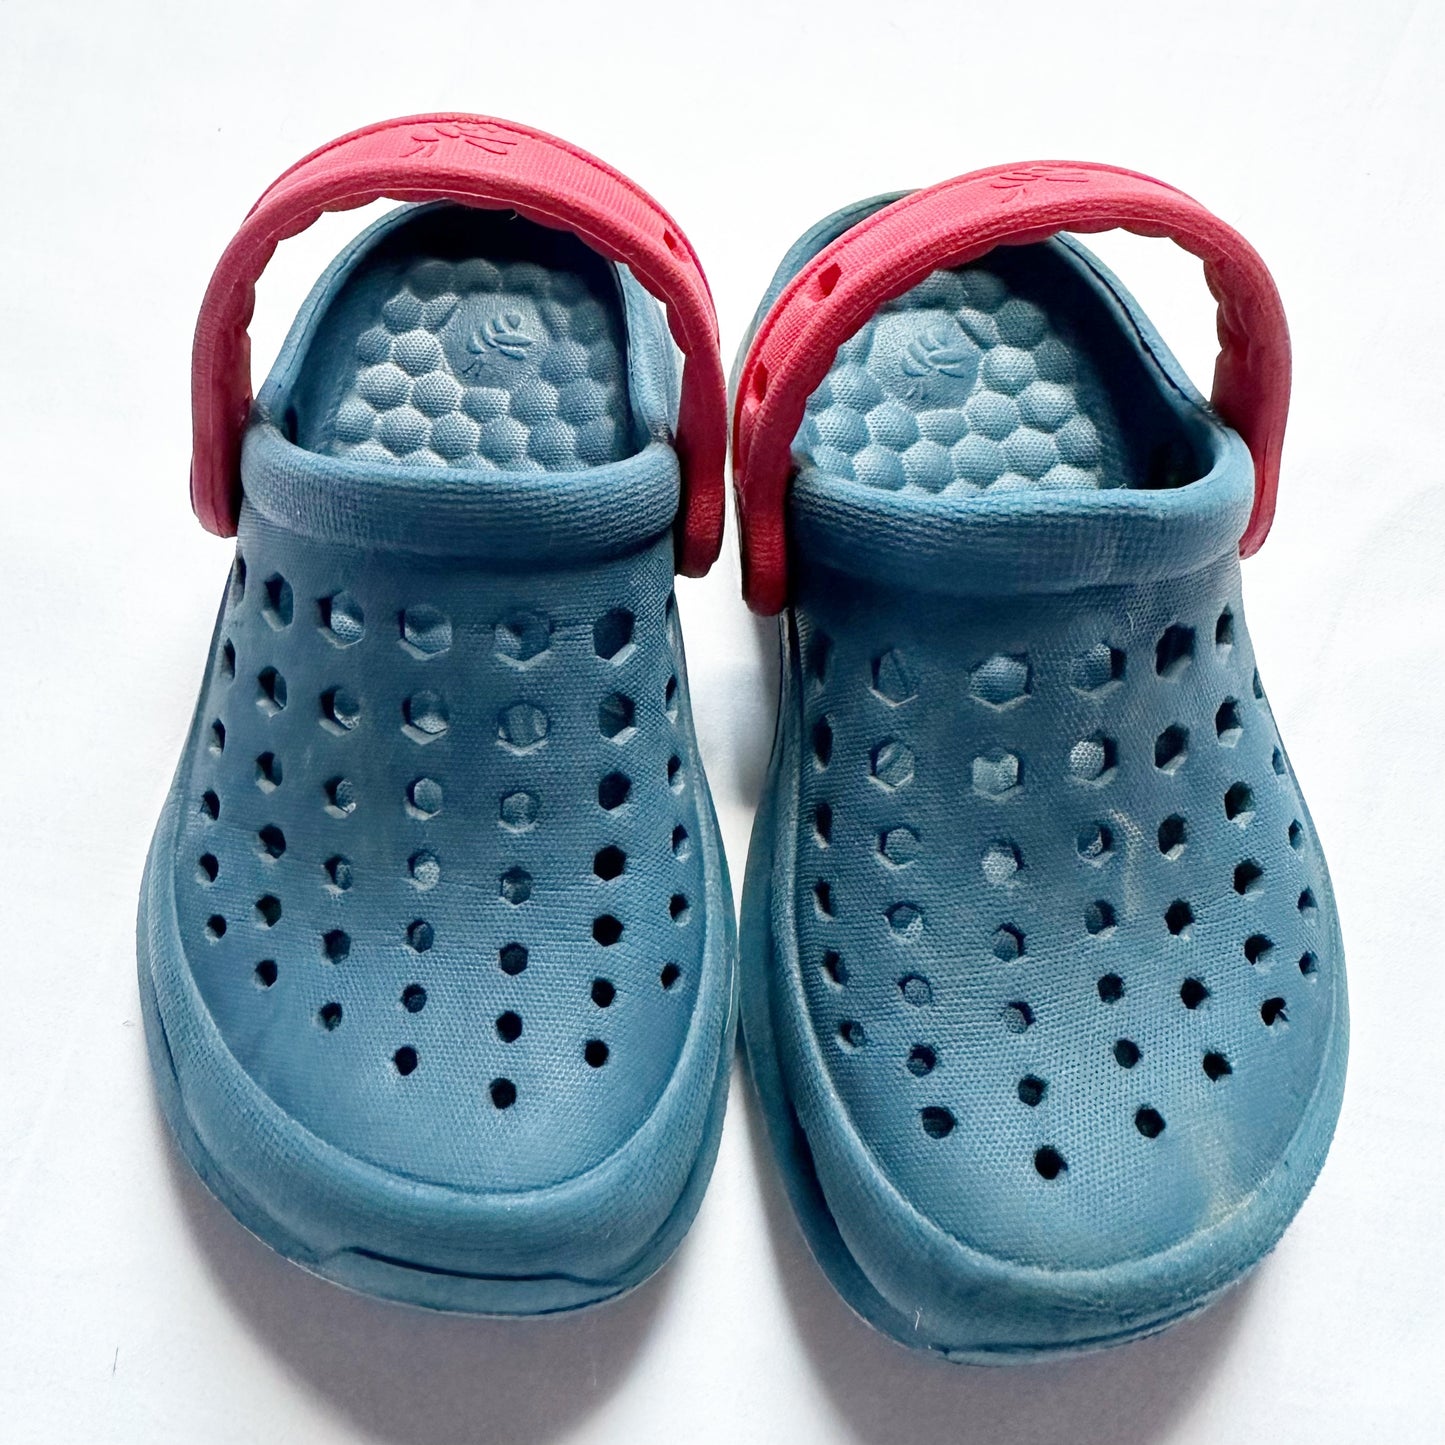 Joybees water shoes blue boys 6-7